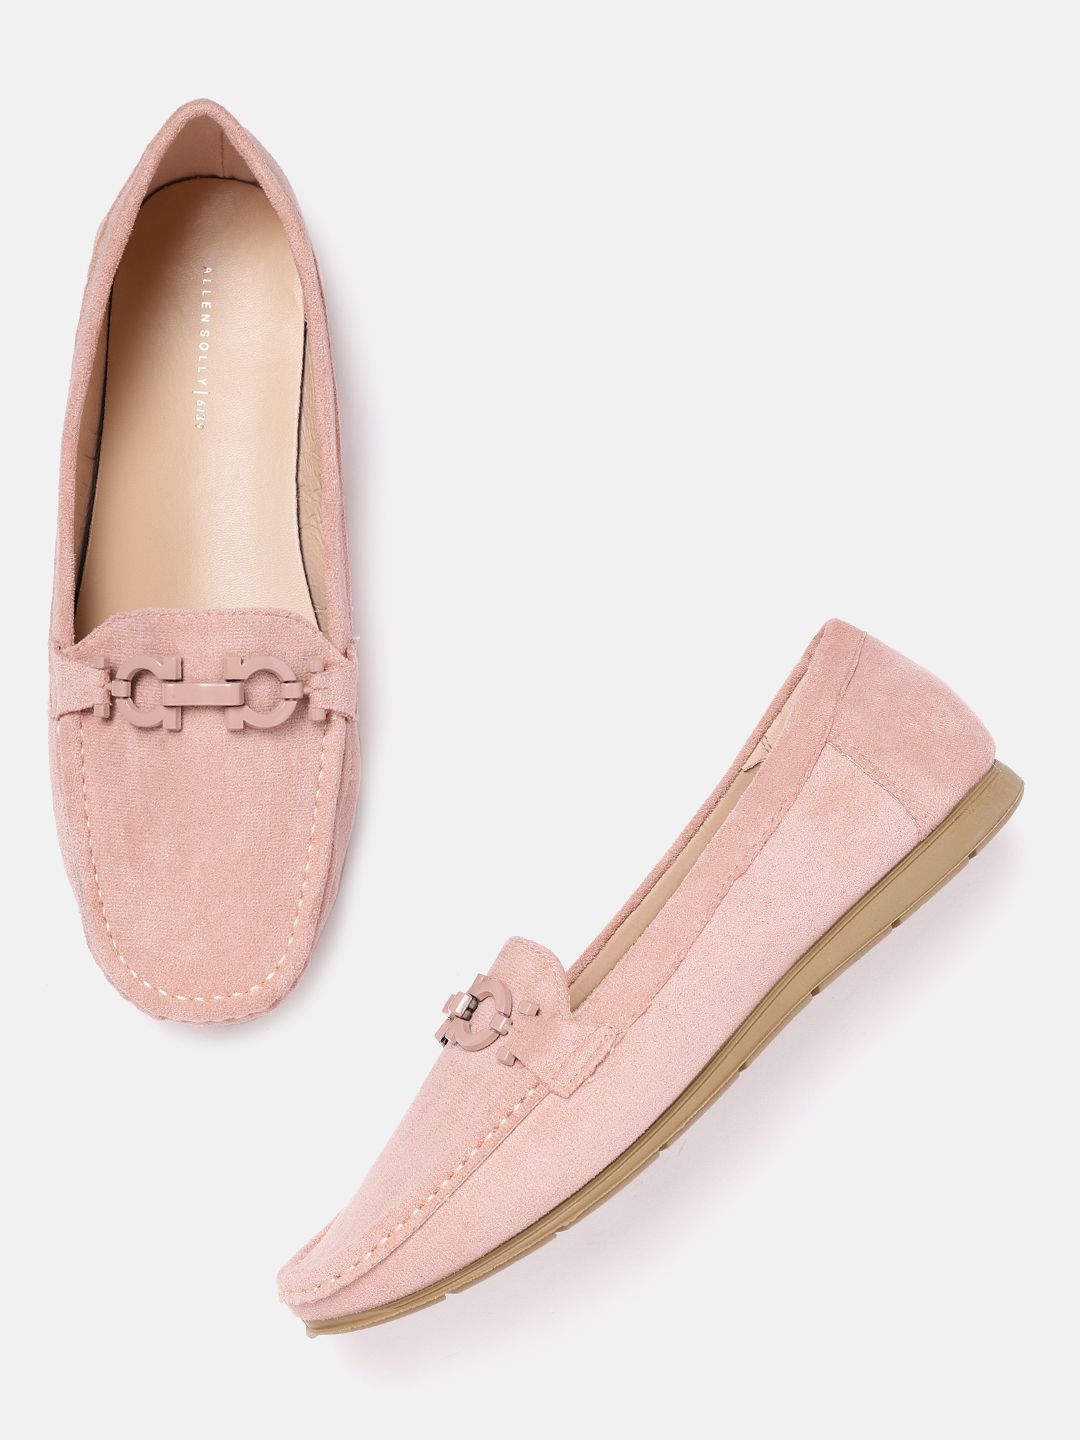 Allen Solly Women Peach-Coloured Solid Wide Horsebit Loafers Price in India